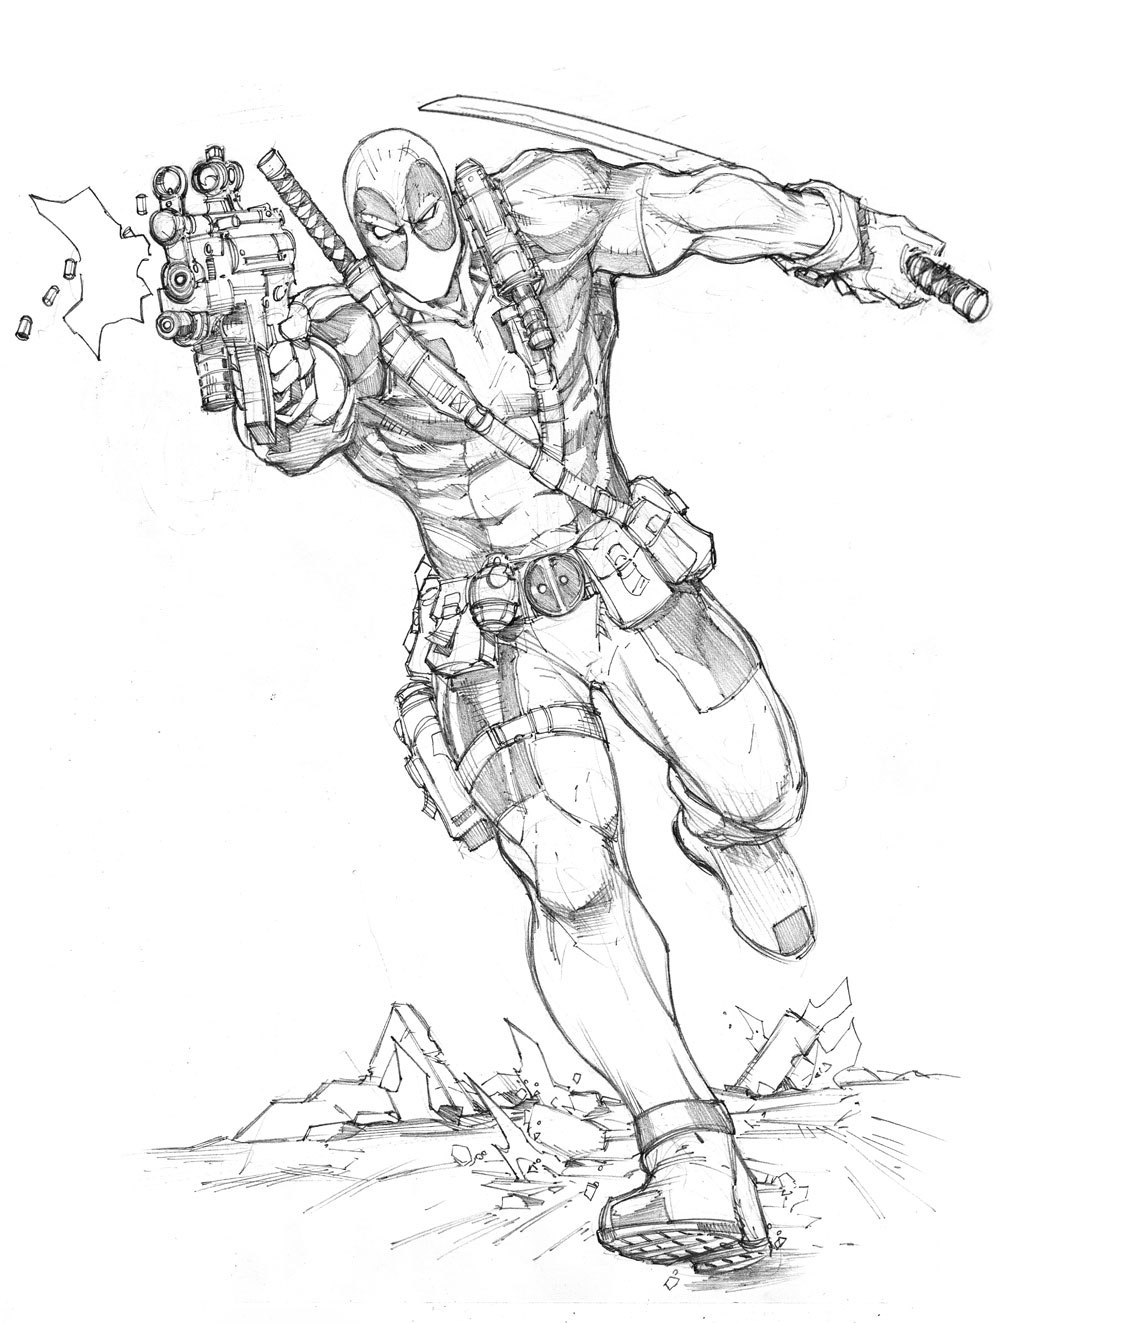 Deadpool Printable Coloring Pages